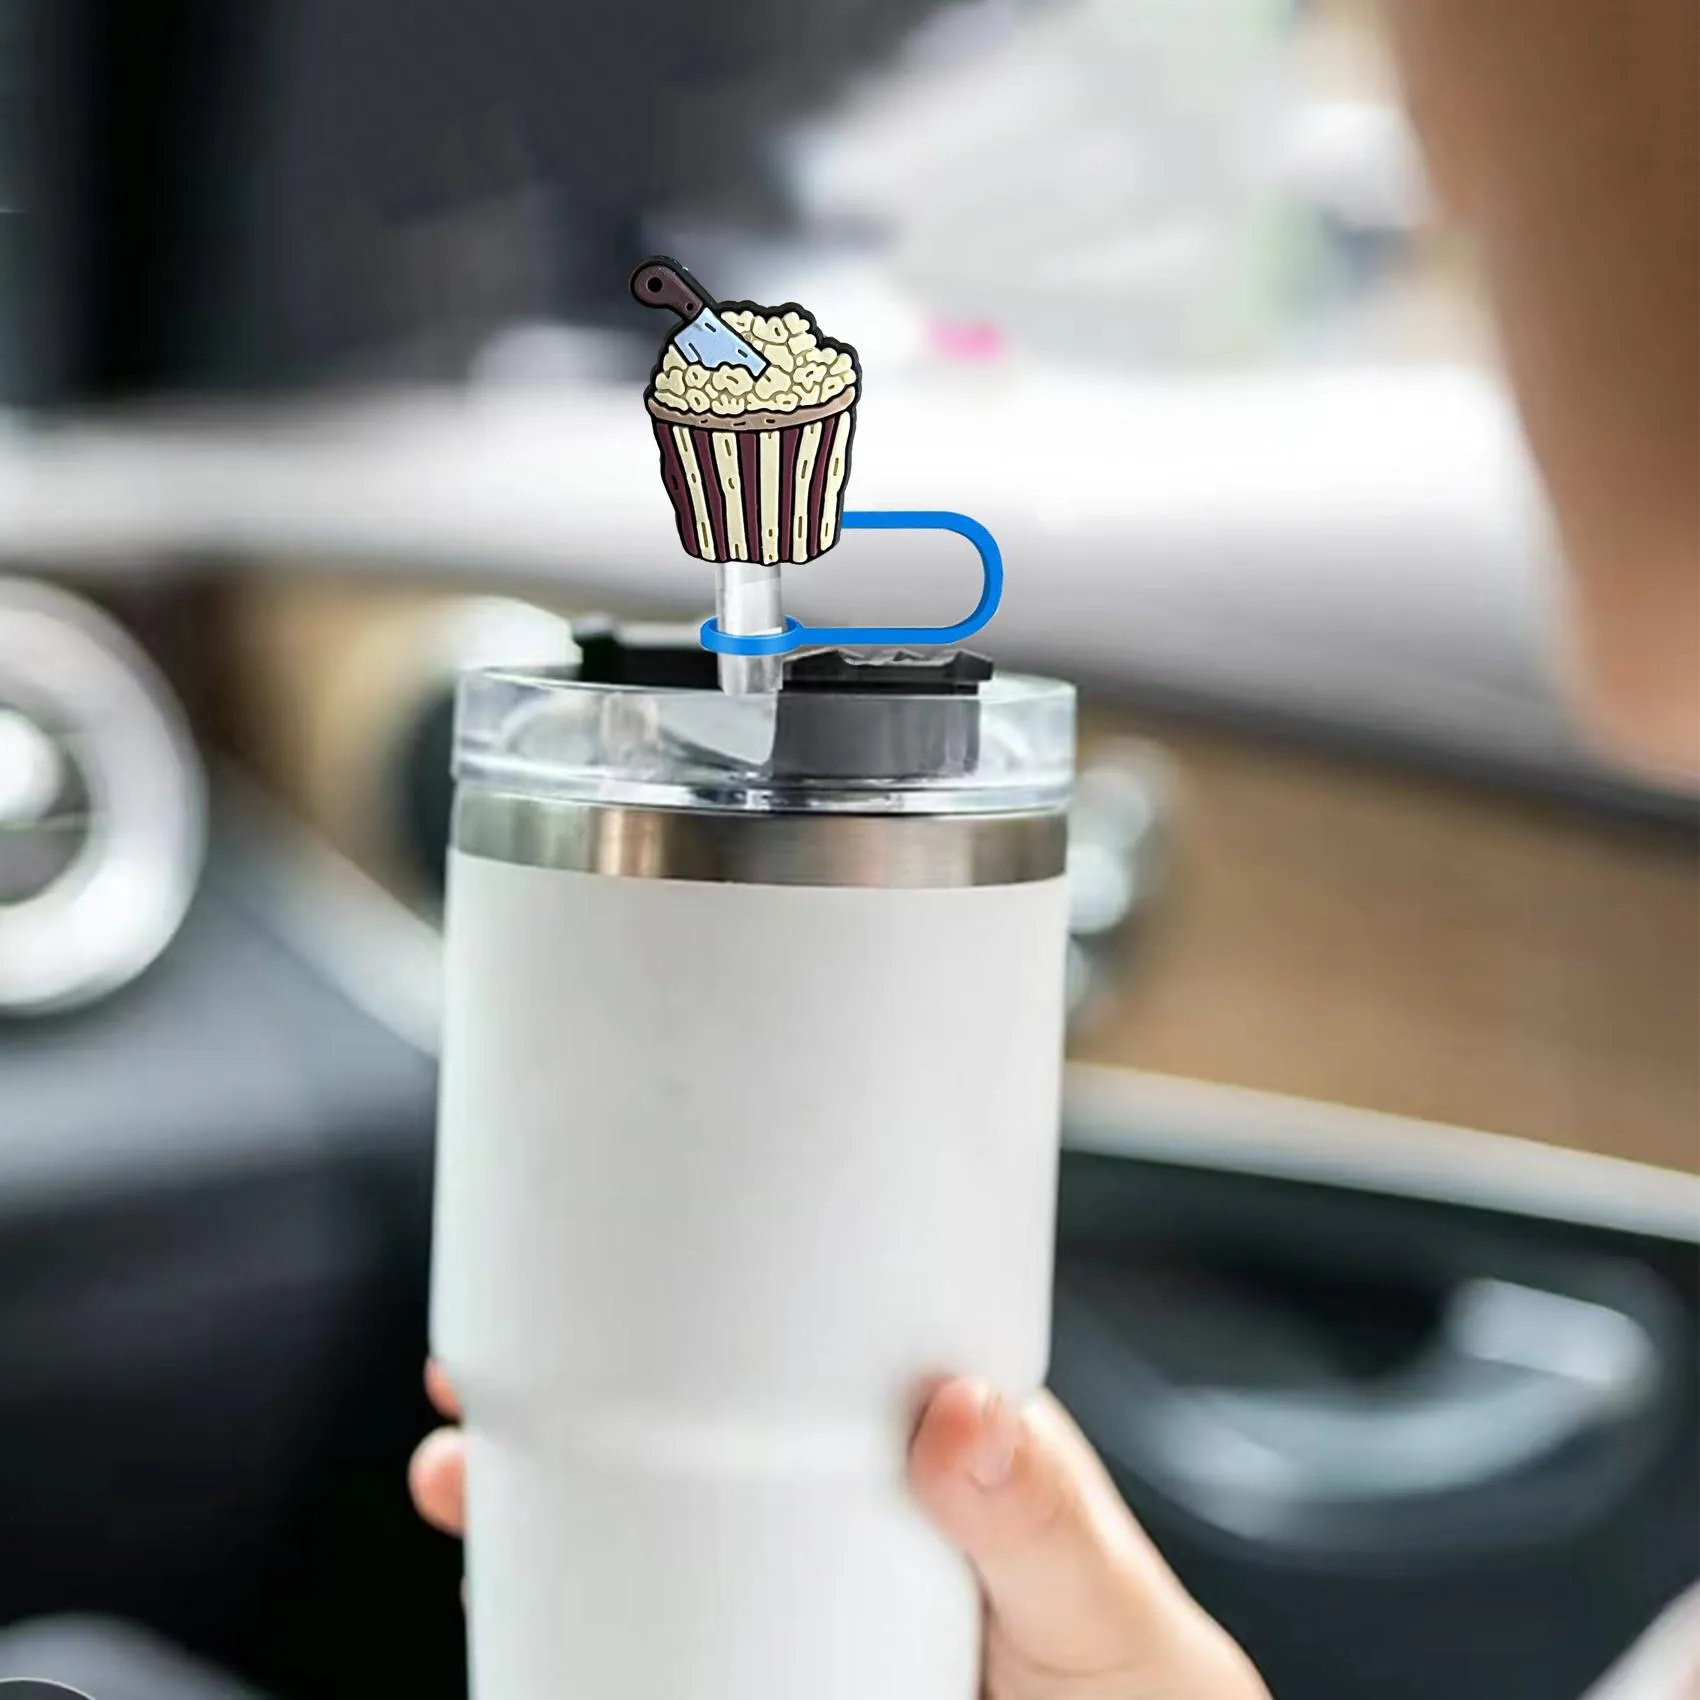 Other Home Decor Ice Cream Skl Head St Er For Cups Ers Cap Fit Cup Dust-Proof Reusable Topper Accessories Cute Funny Tumbler Man Woman Otdks